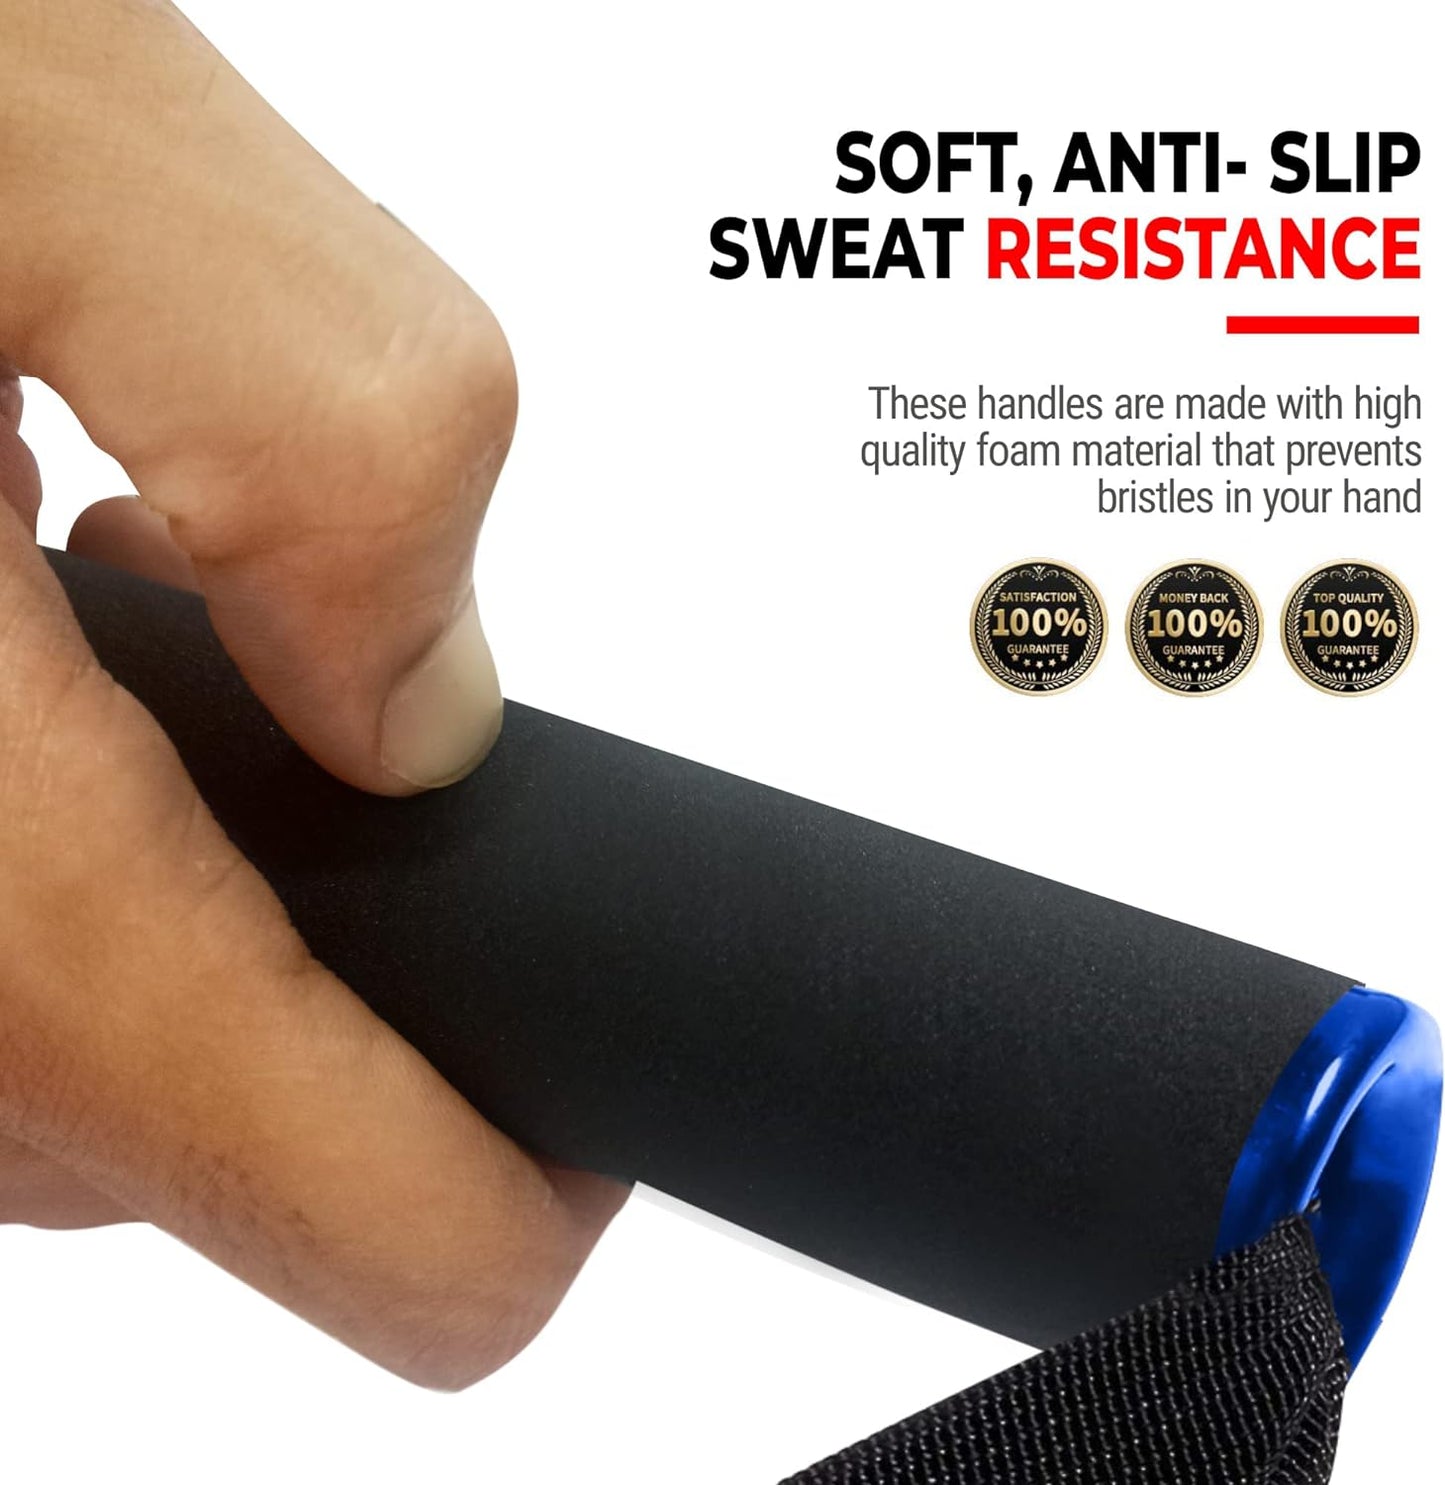 Tricep resistance bands with handles, extension for cable gym rope. Have you ever wondered if your resistance bands are robust enough? R2F Tricep Resistance Bands will help you build muscle and get ripped. These latex-free resistance bands are perfect for a cable gym or just at home.